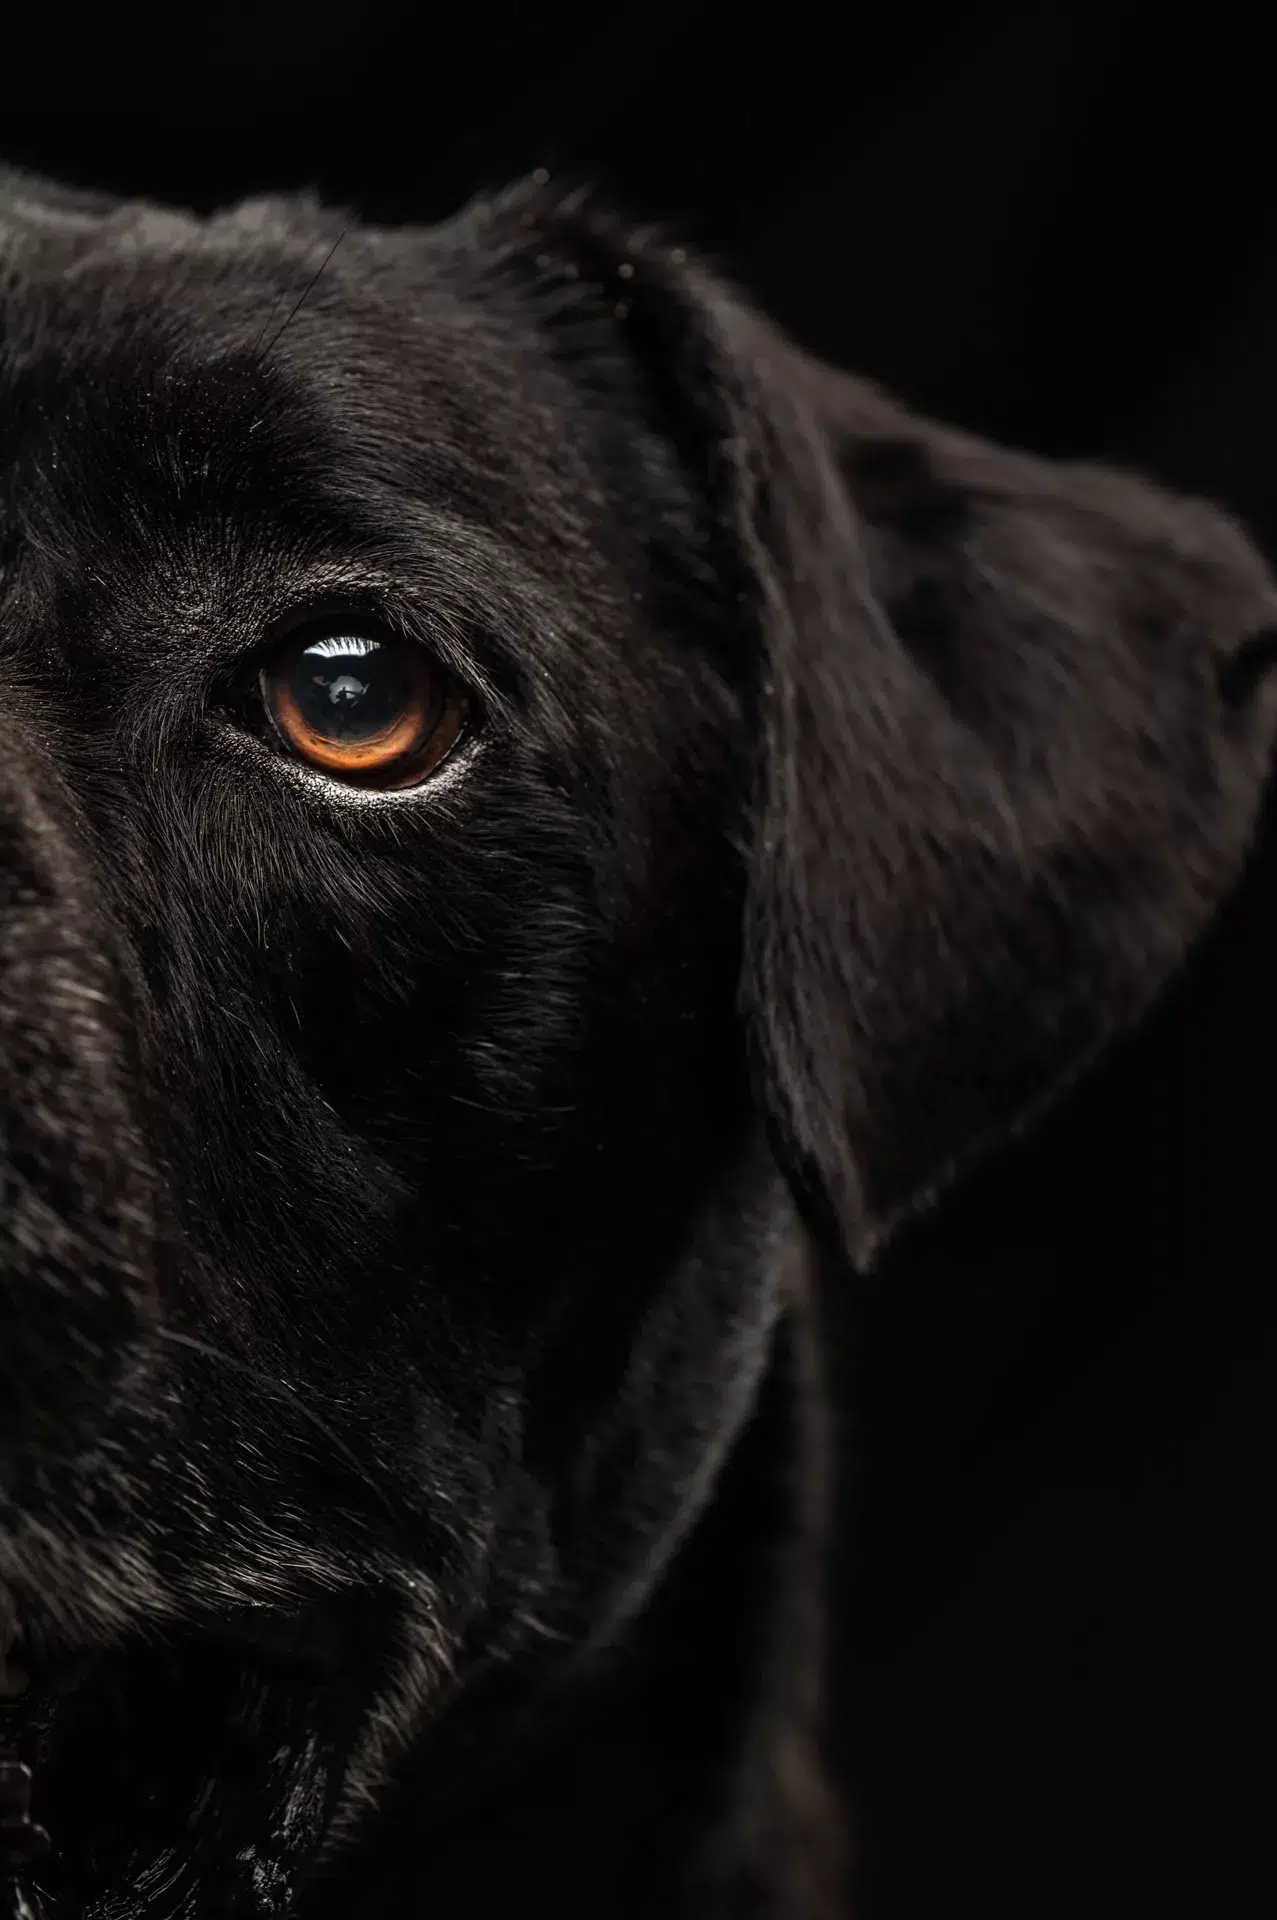 Photoshoot with pets. A black dog photographed in a studio. Only half of the face is shown.